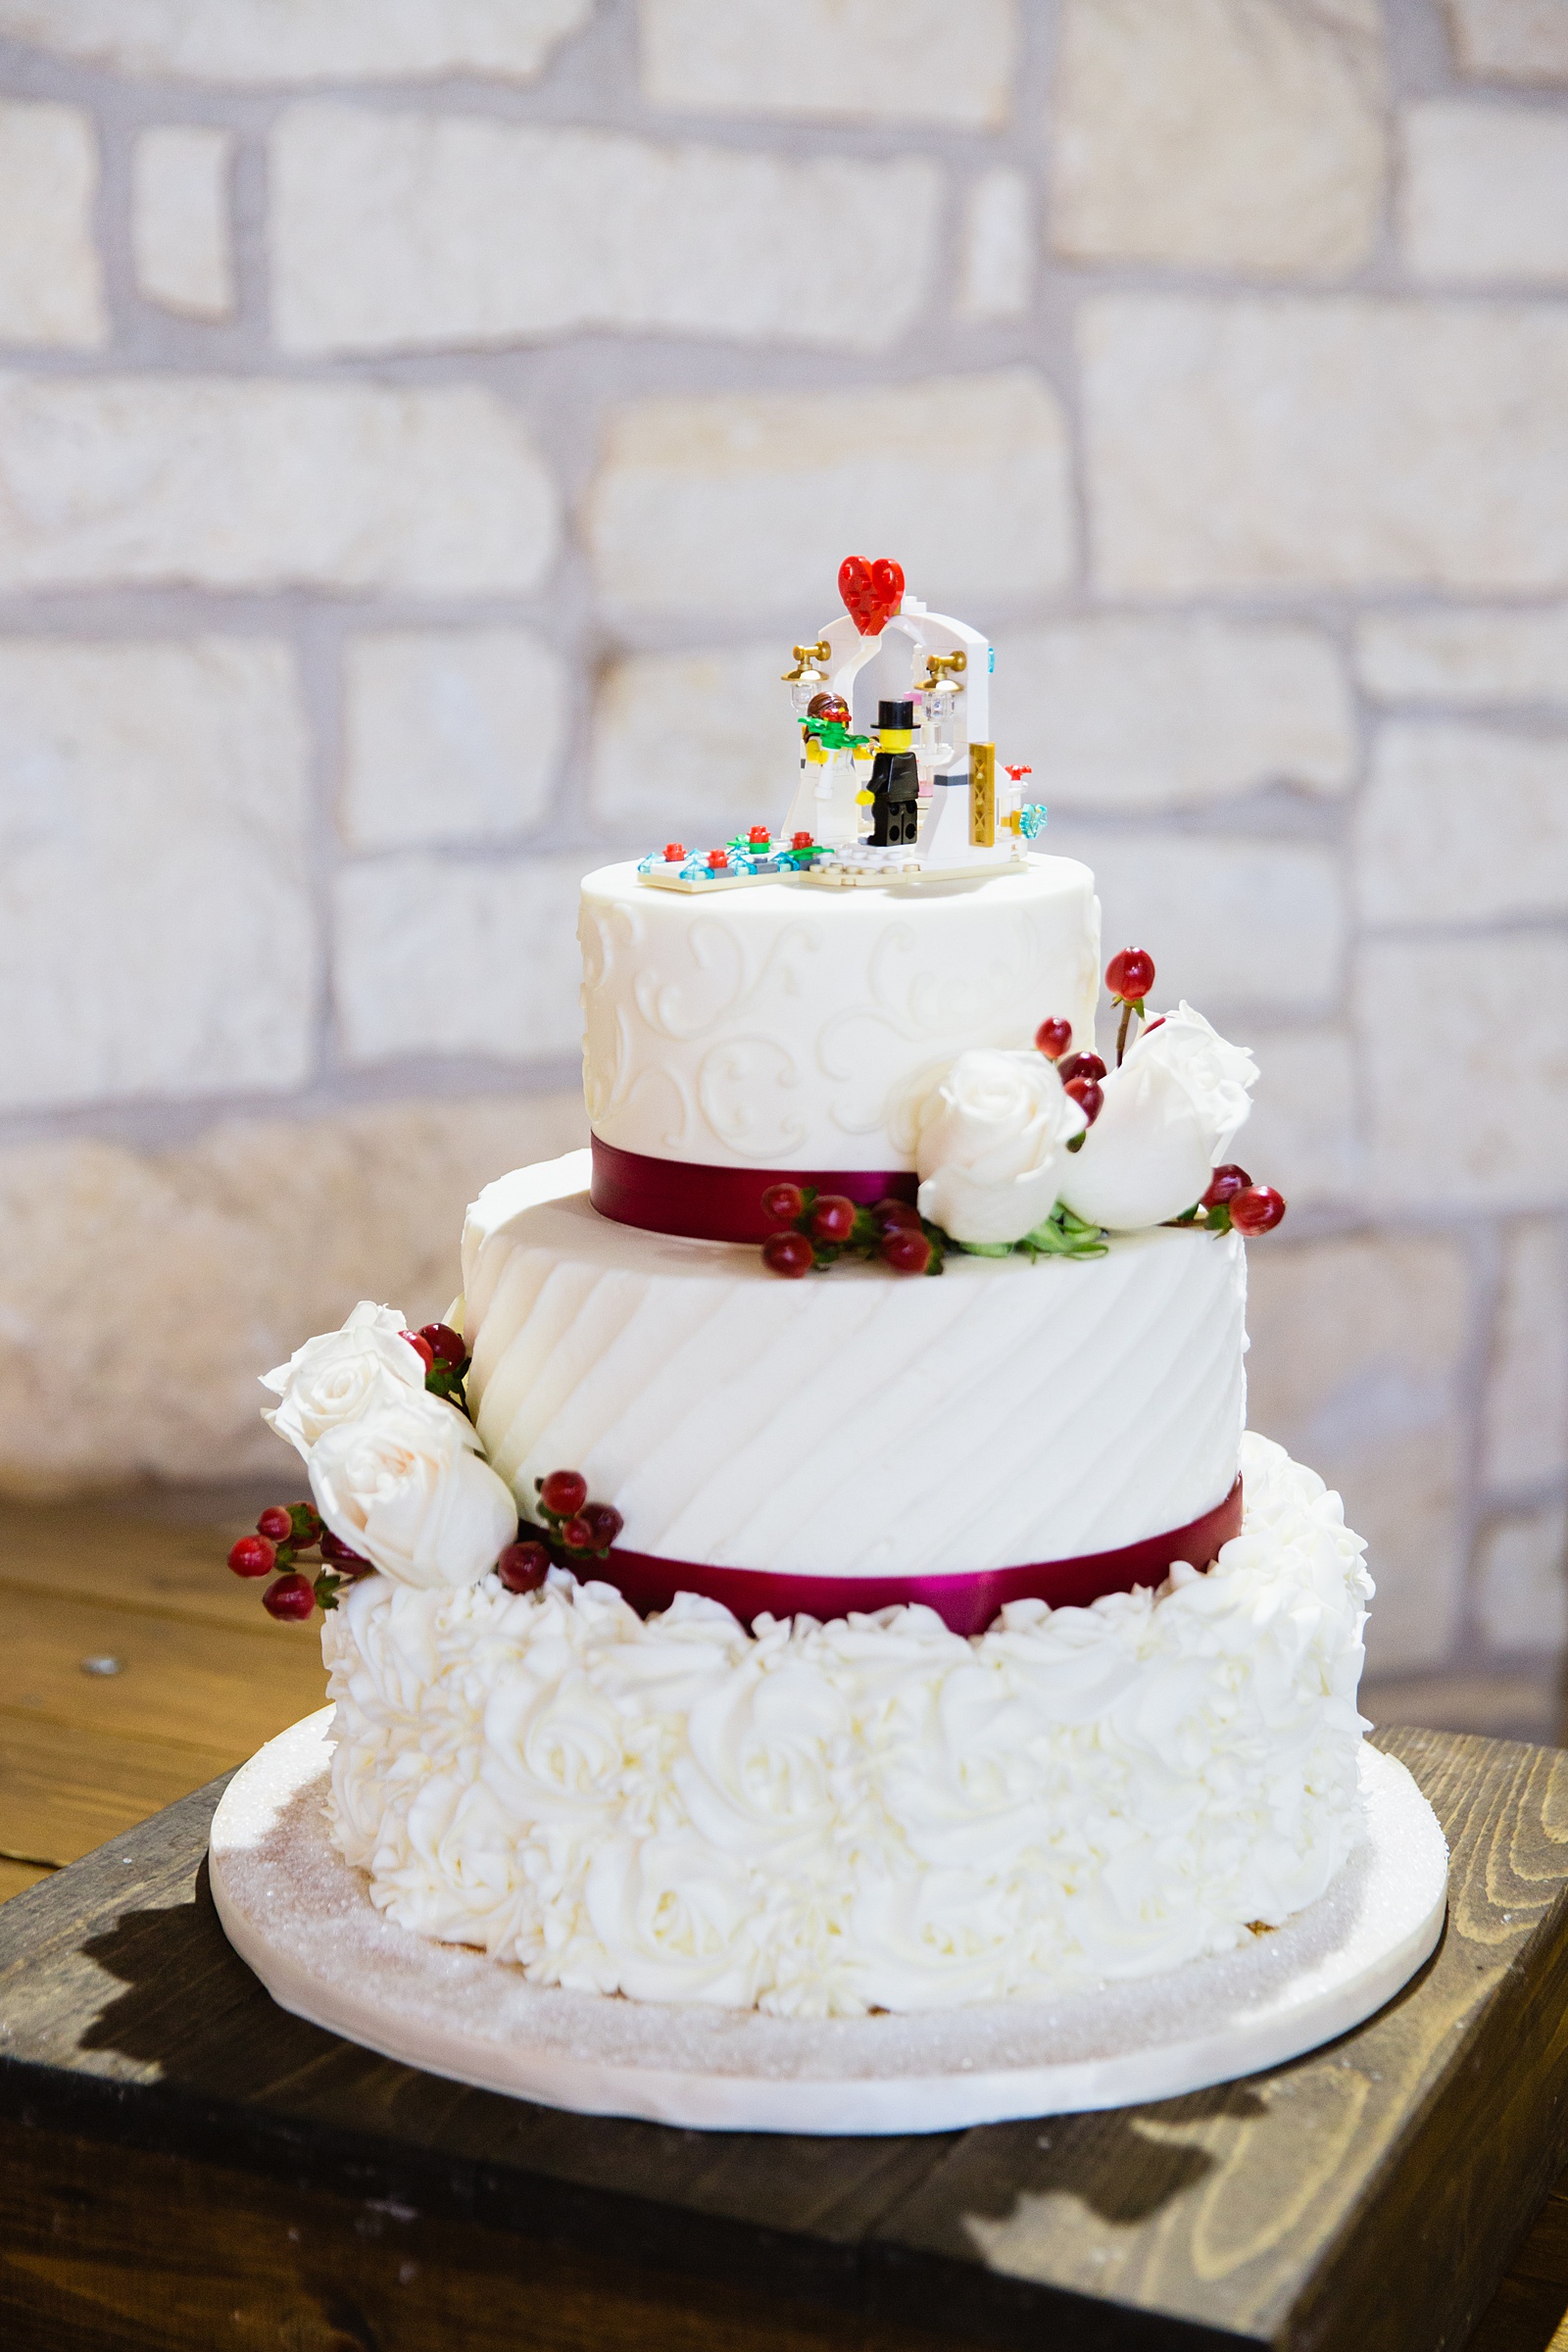 White and red wedding cake with lego bride and groom cake topper by Arizona wedding photographer PMA Photography.